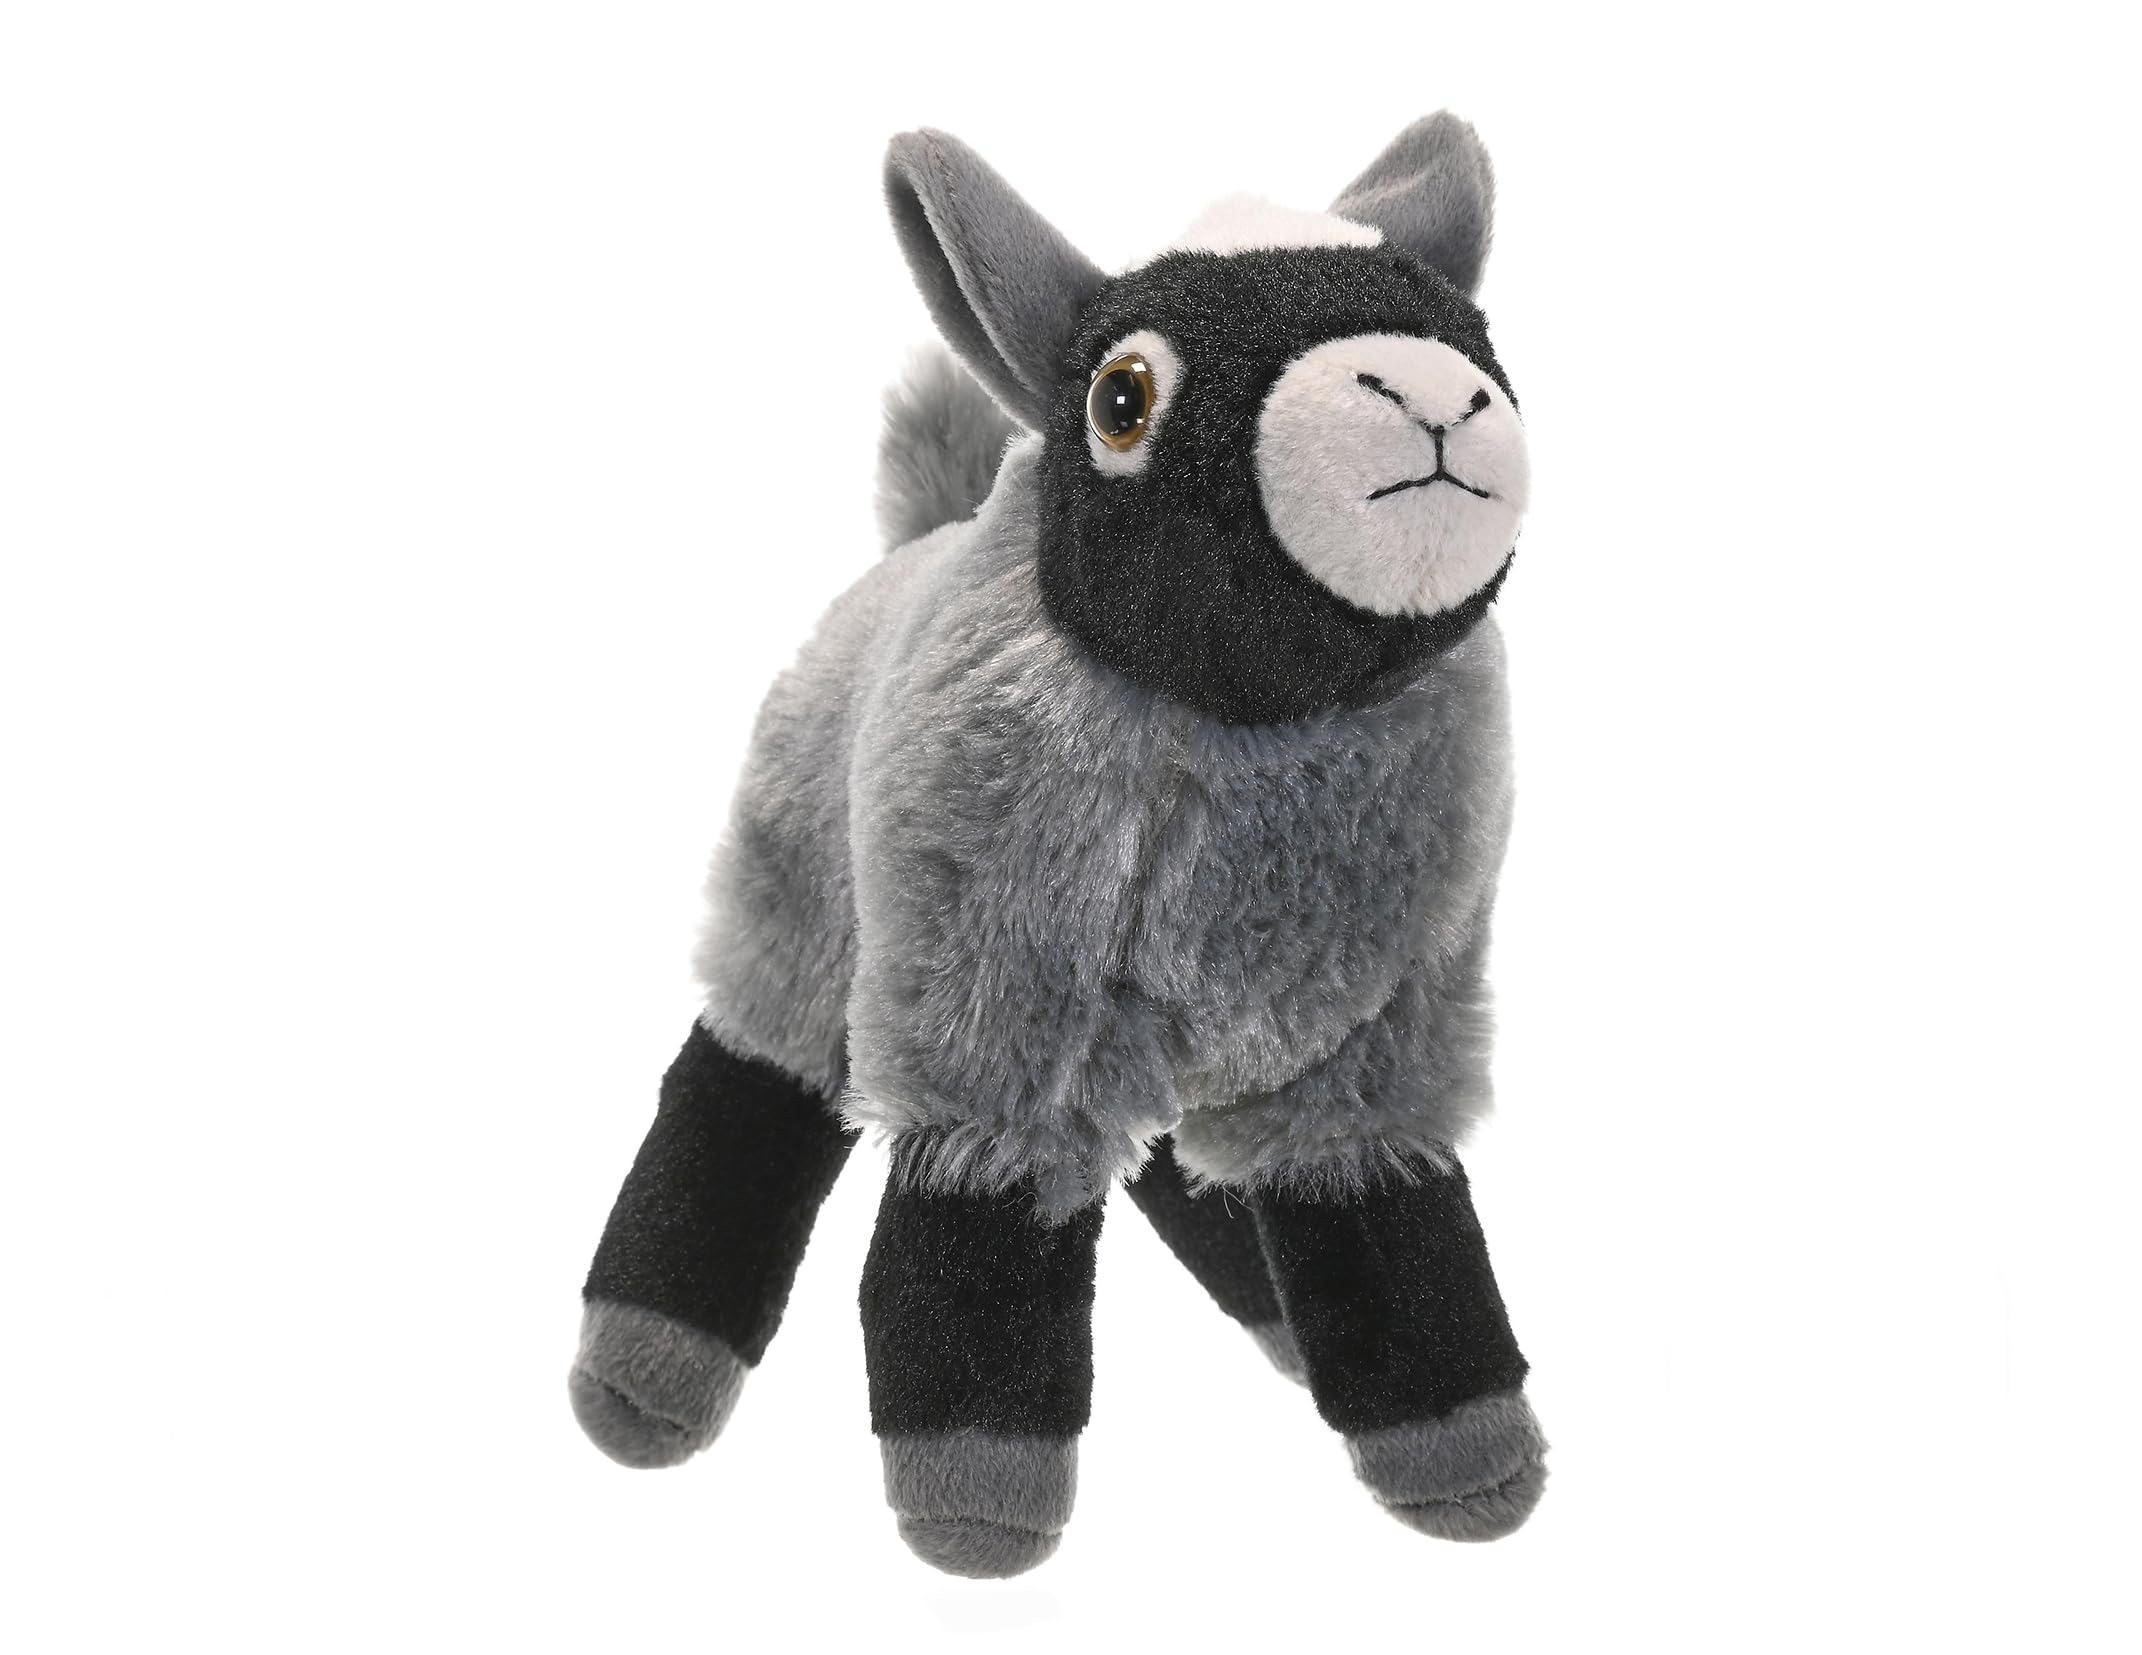 8" Wild Republic Goat Plush $7.75 + Free Shipping w/ Prime or on orders over $35